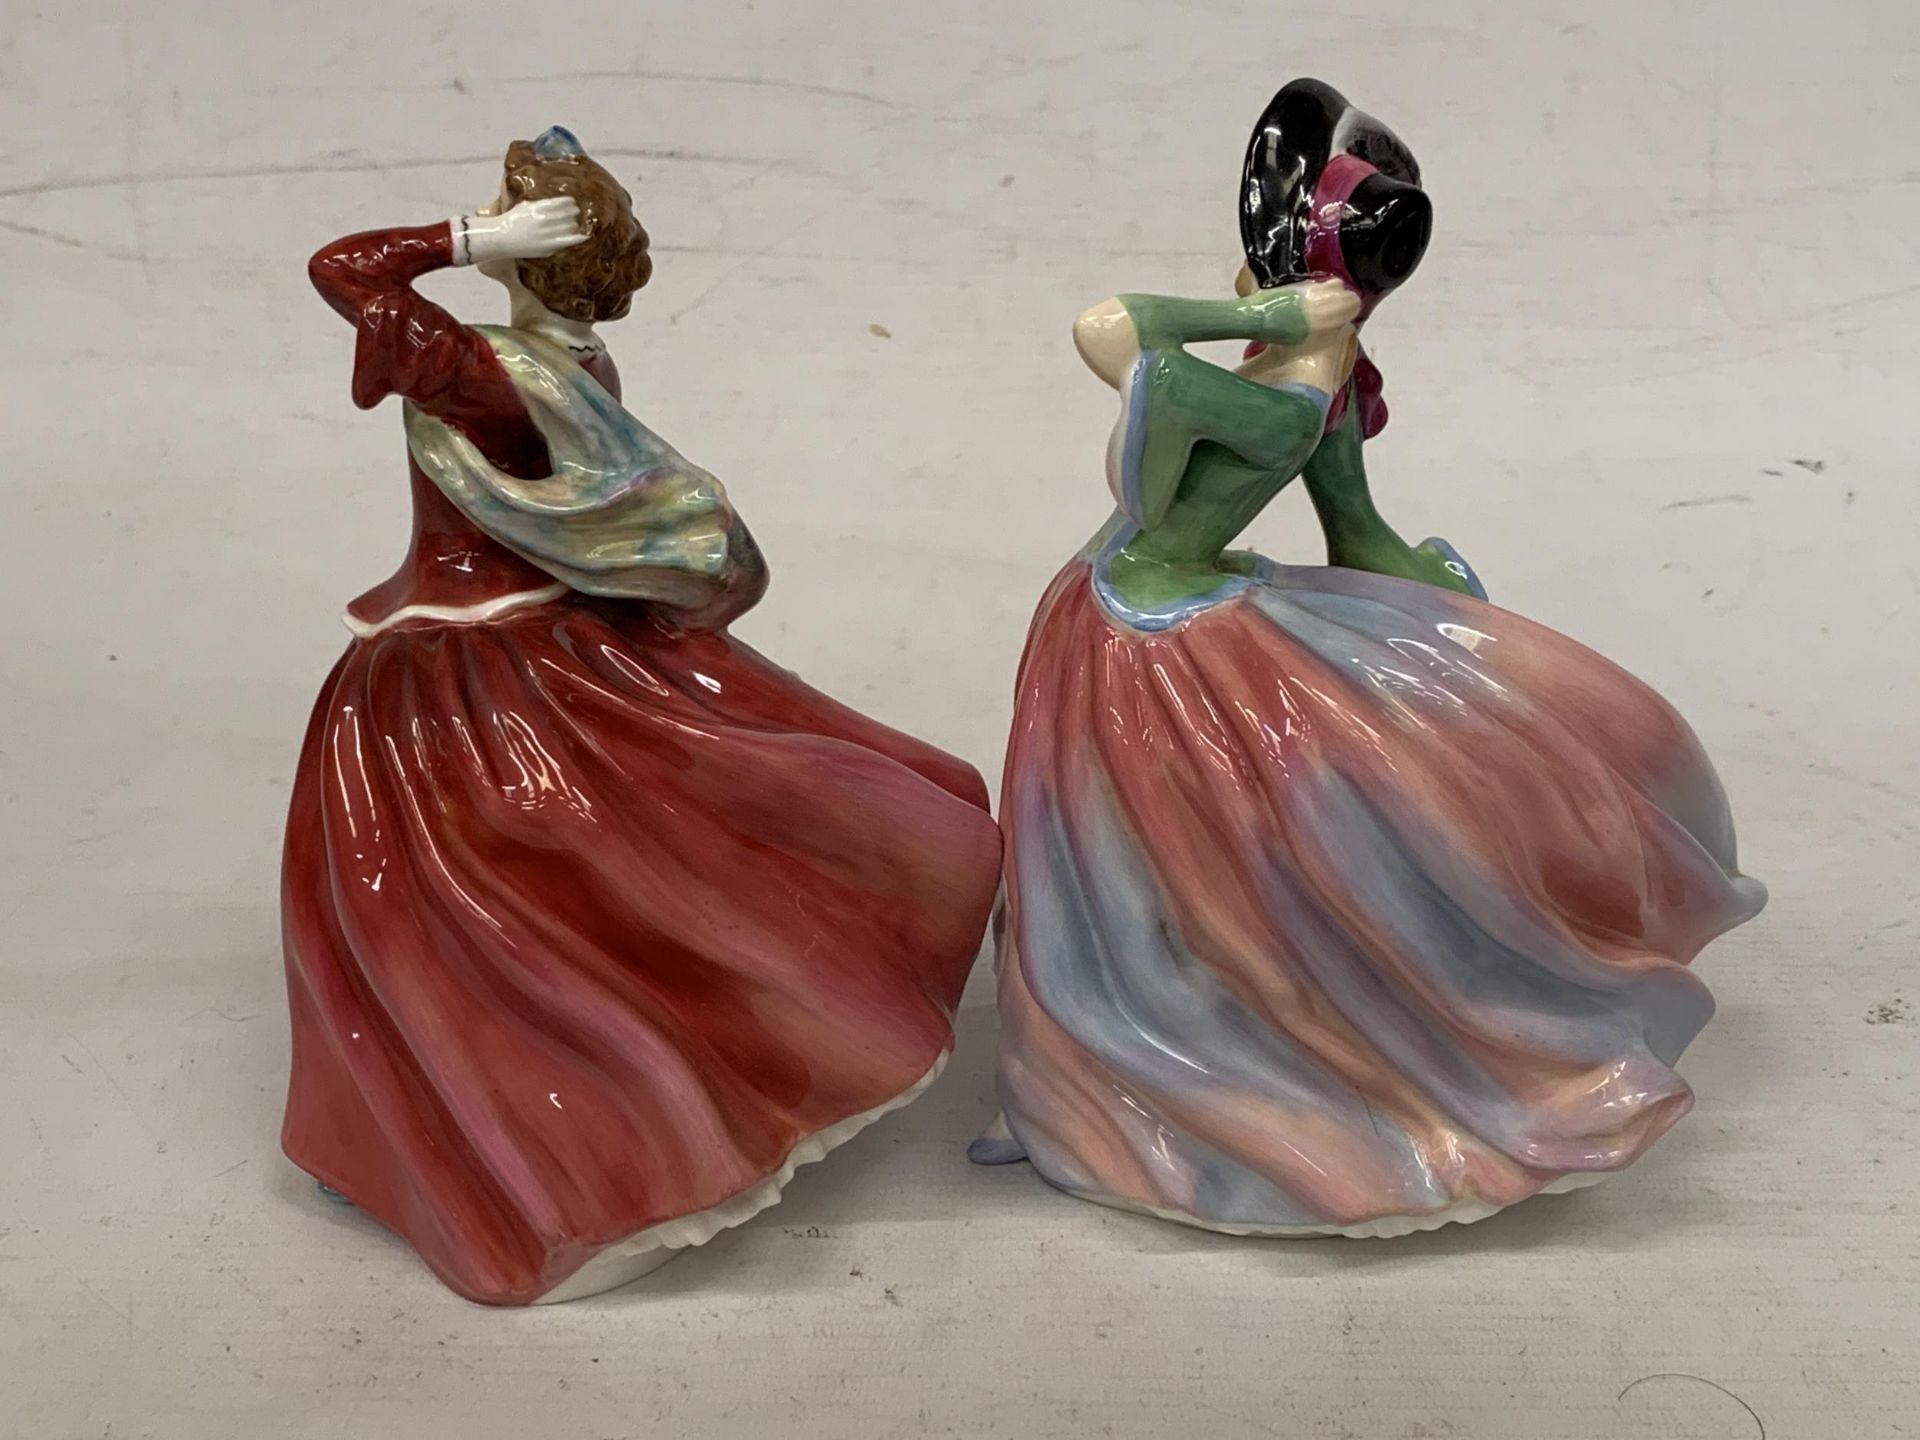 TWO ROYAL DOULTON FIGURINES "AUTUMN BREEZES" HN 1911 AND "BLITHE MORNING" HB 2045 - Image 4 of 5